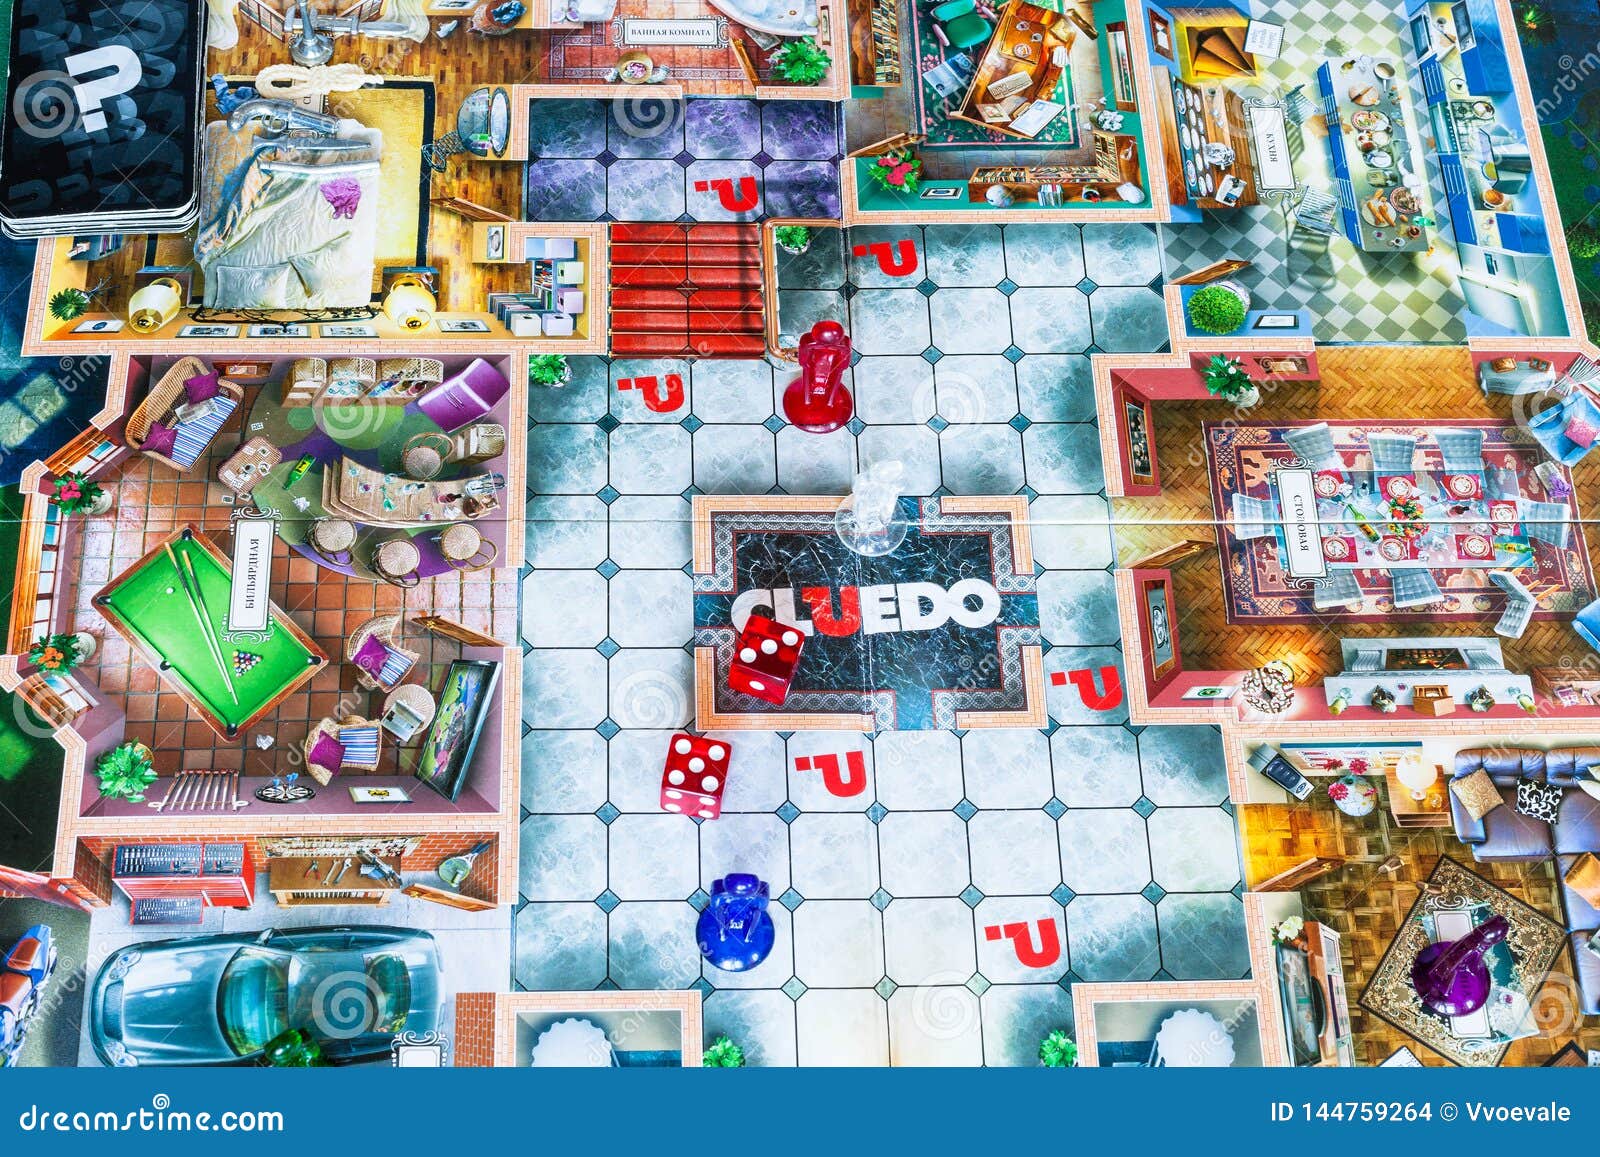 Cluedo Board Game Layout Clipart